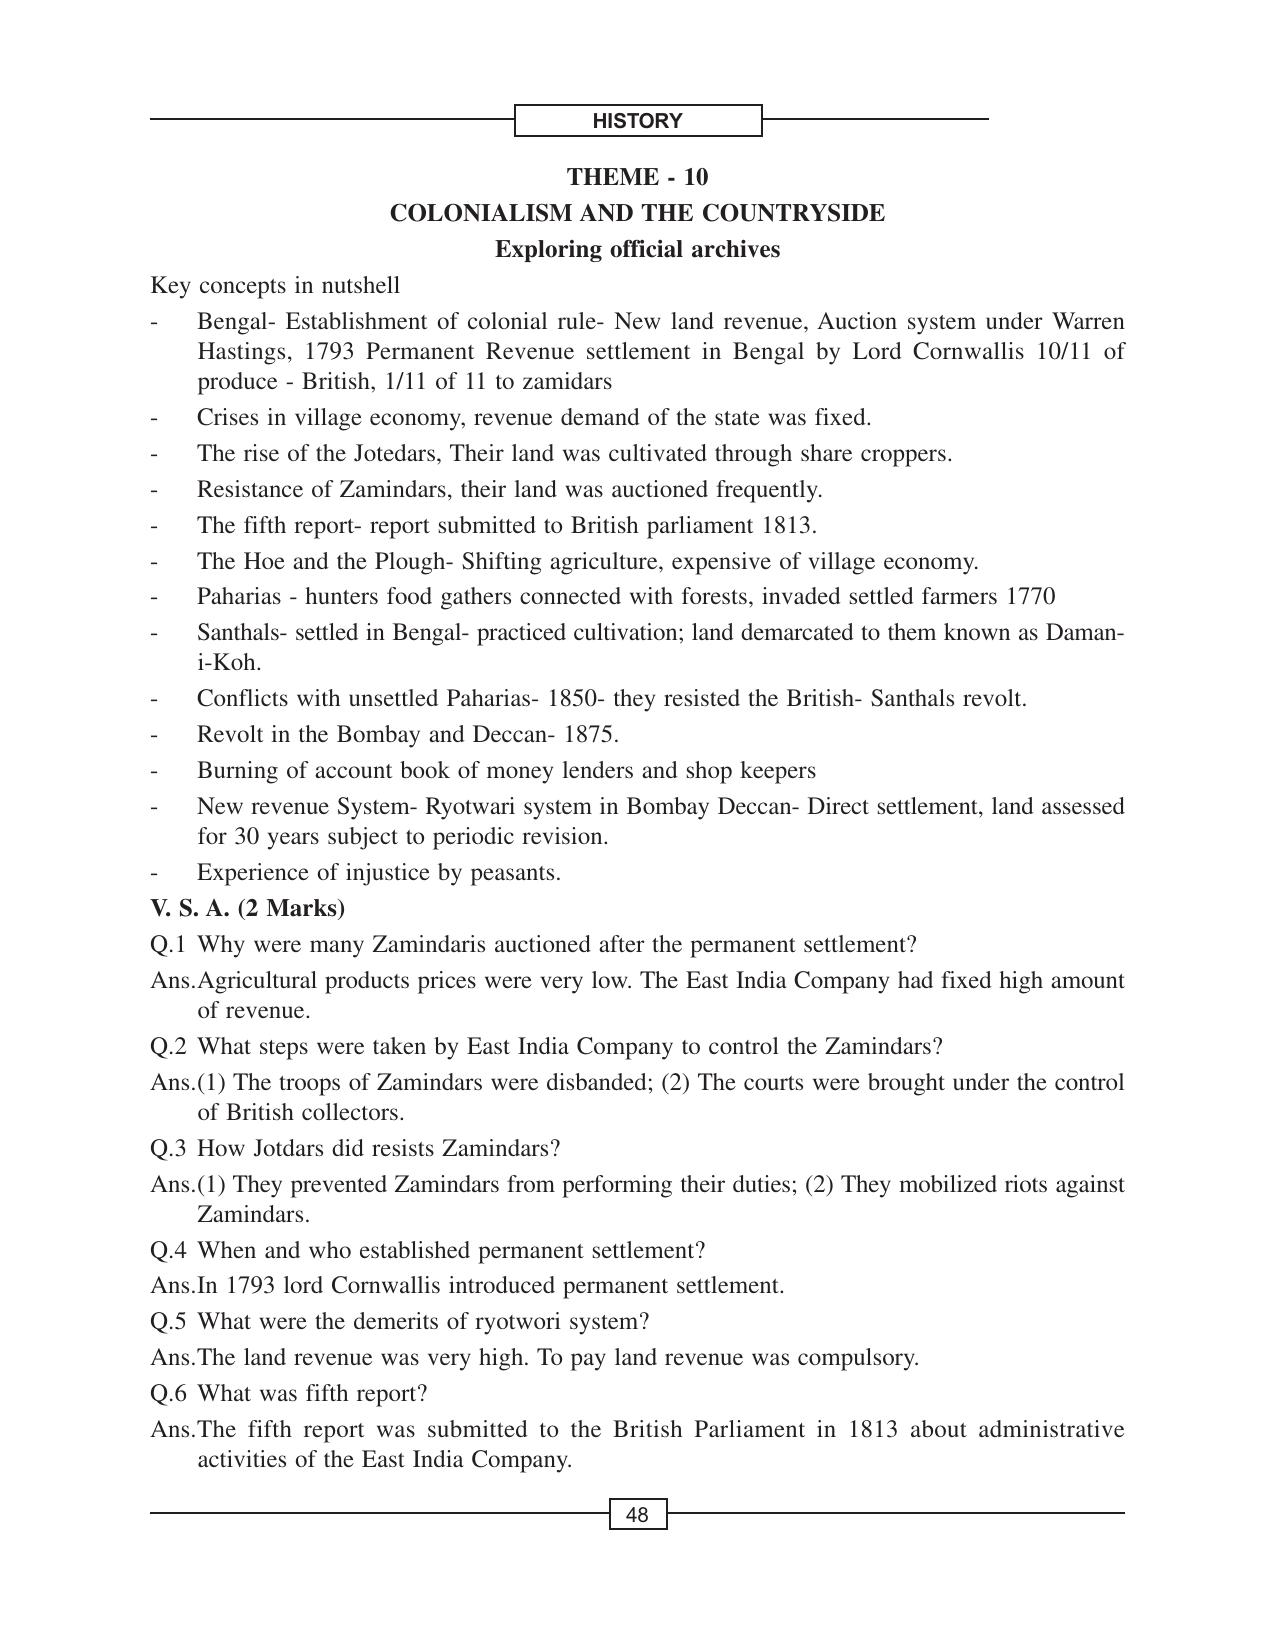 CBSE Class 12 History Colonialism and Countryside Exploring official - Page 1